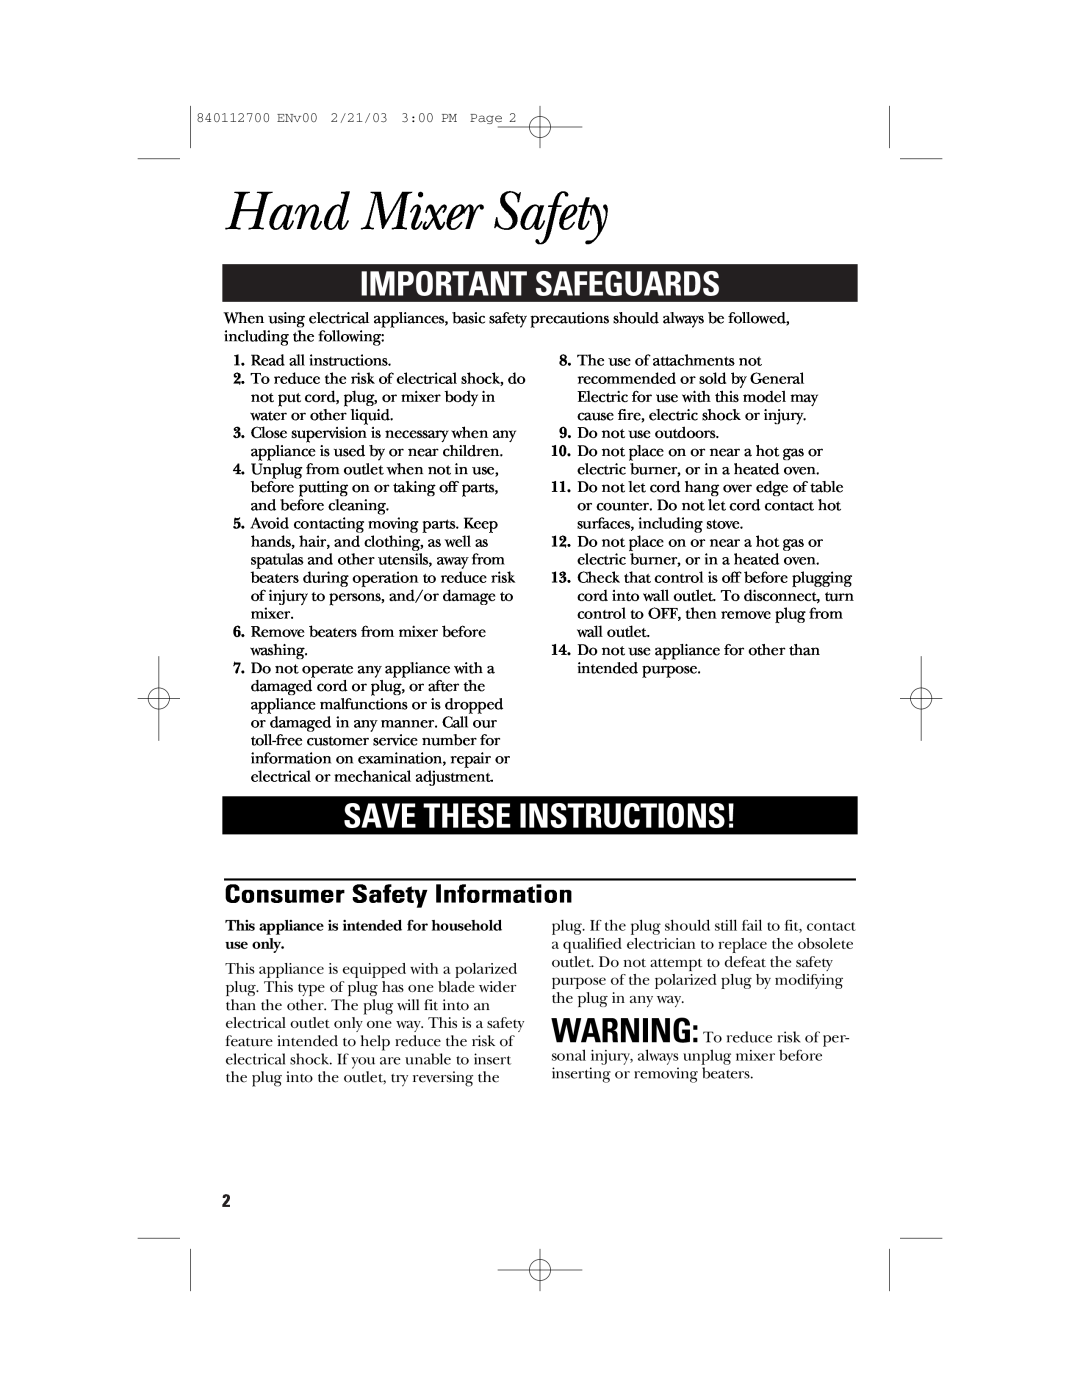 GE 840112700, 168951 manual Hand Mixer Safety, Important Safeguards, Save These Instructions, Consumer Safety Information 